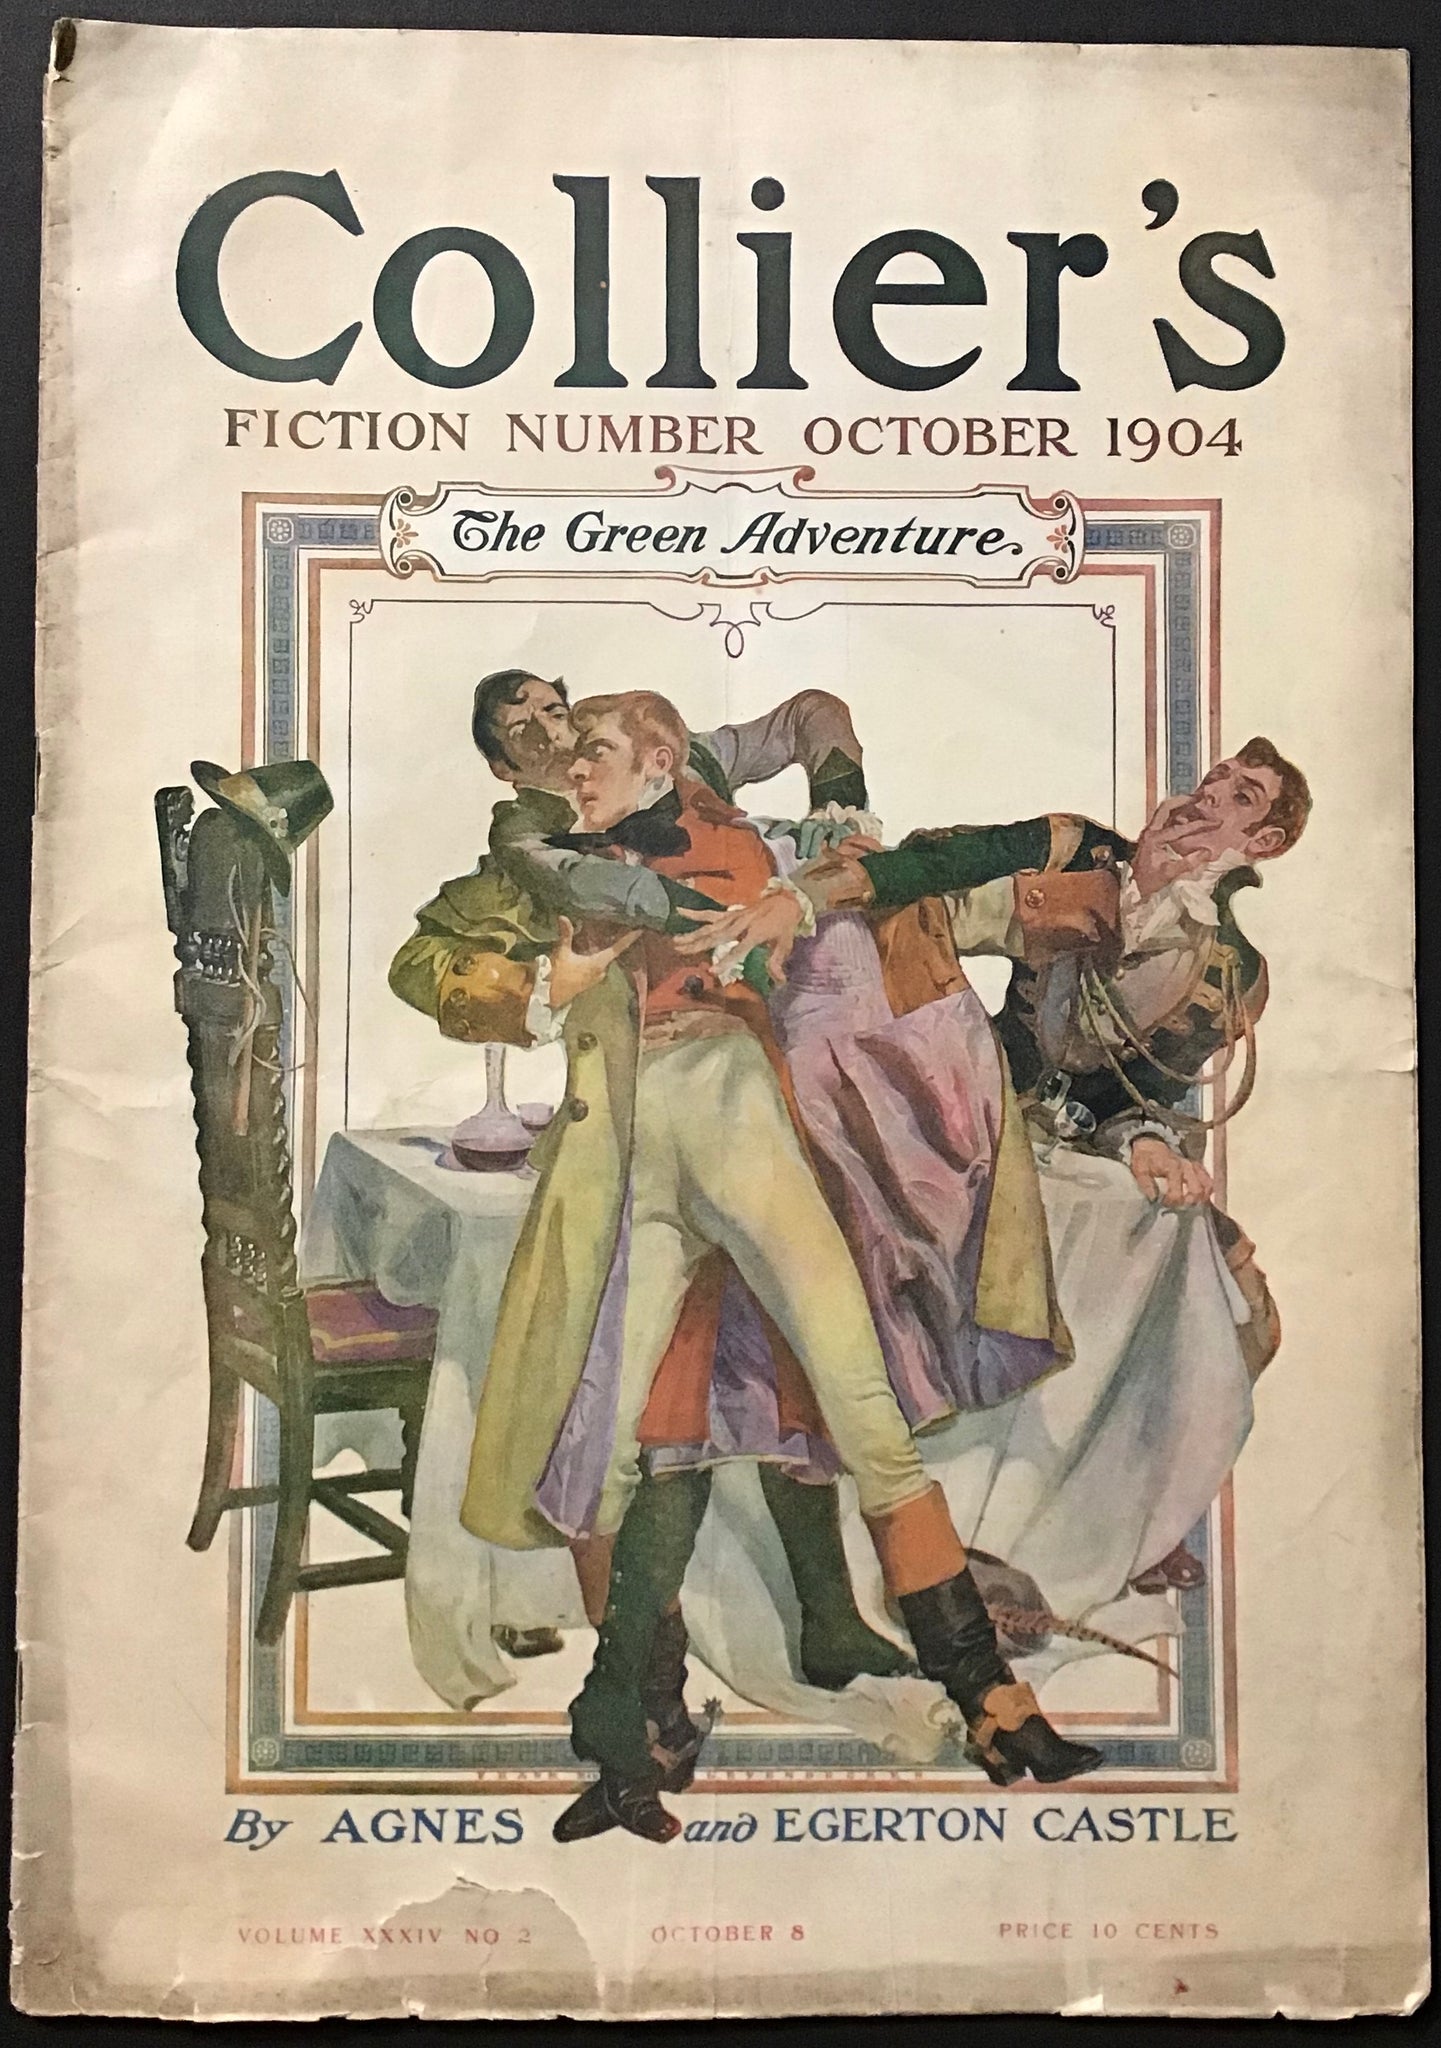 Collier's - Fiction Number October 1904